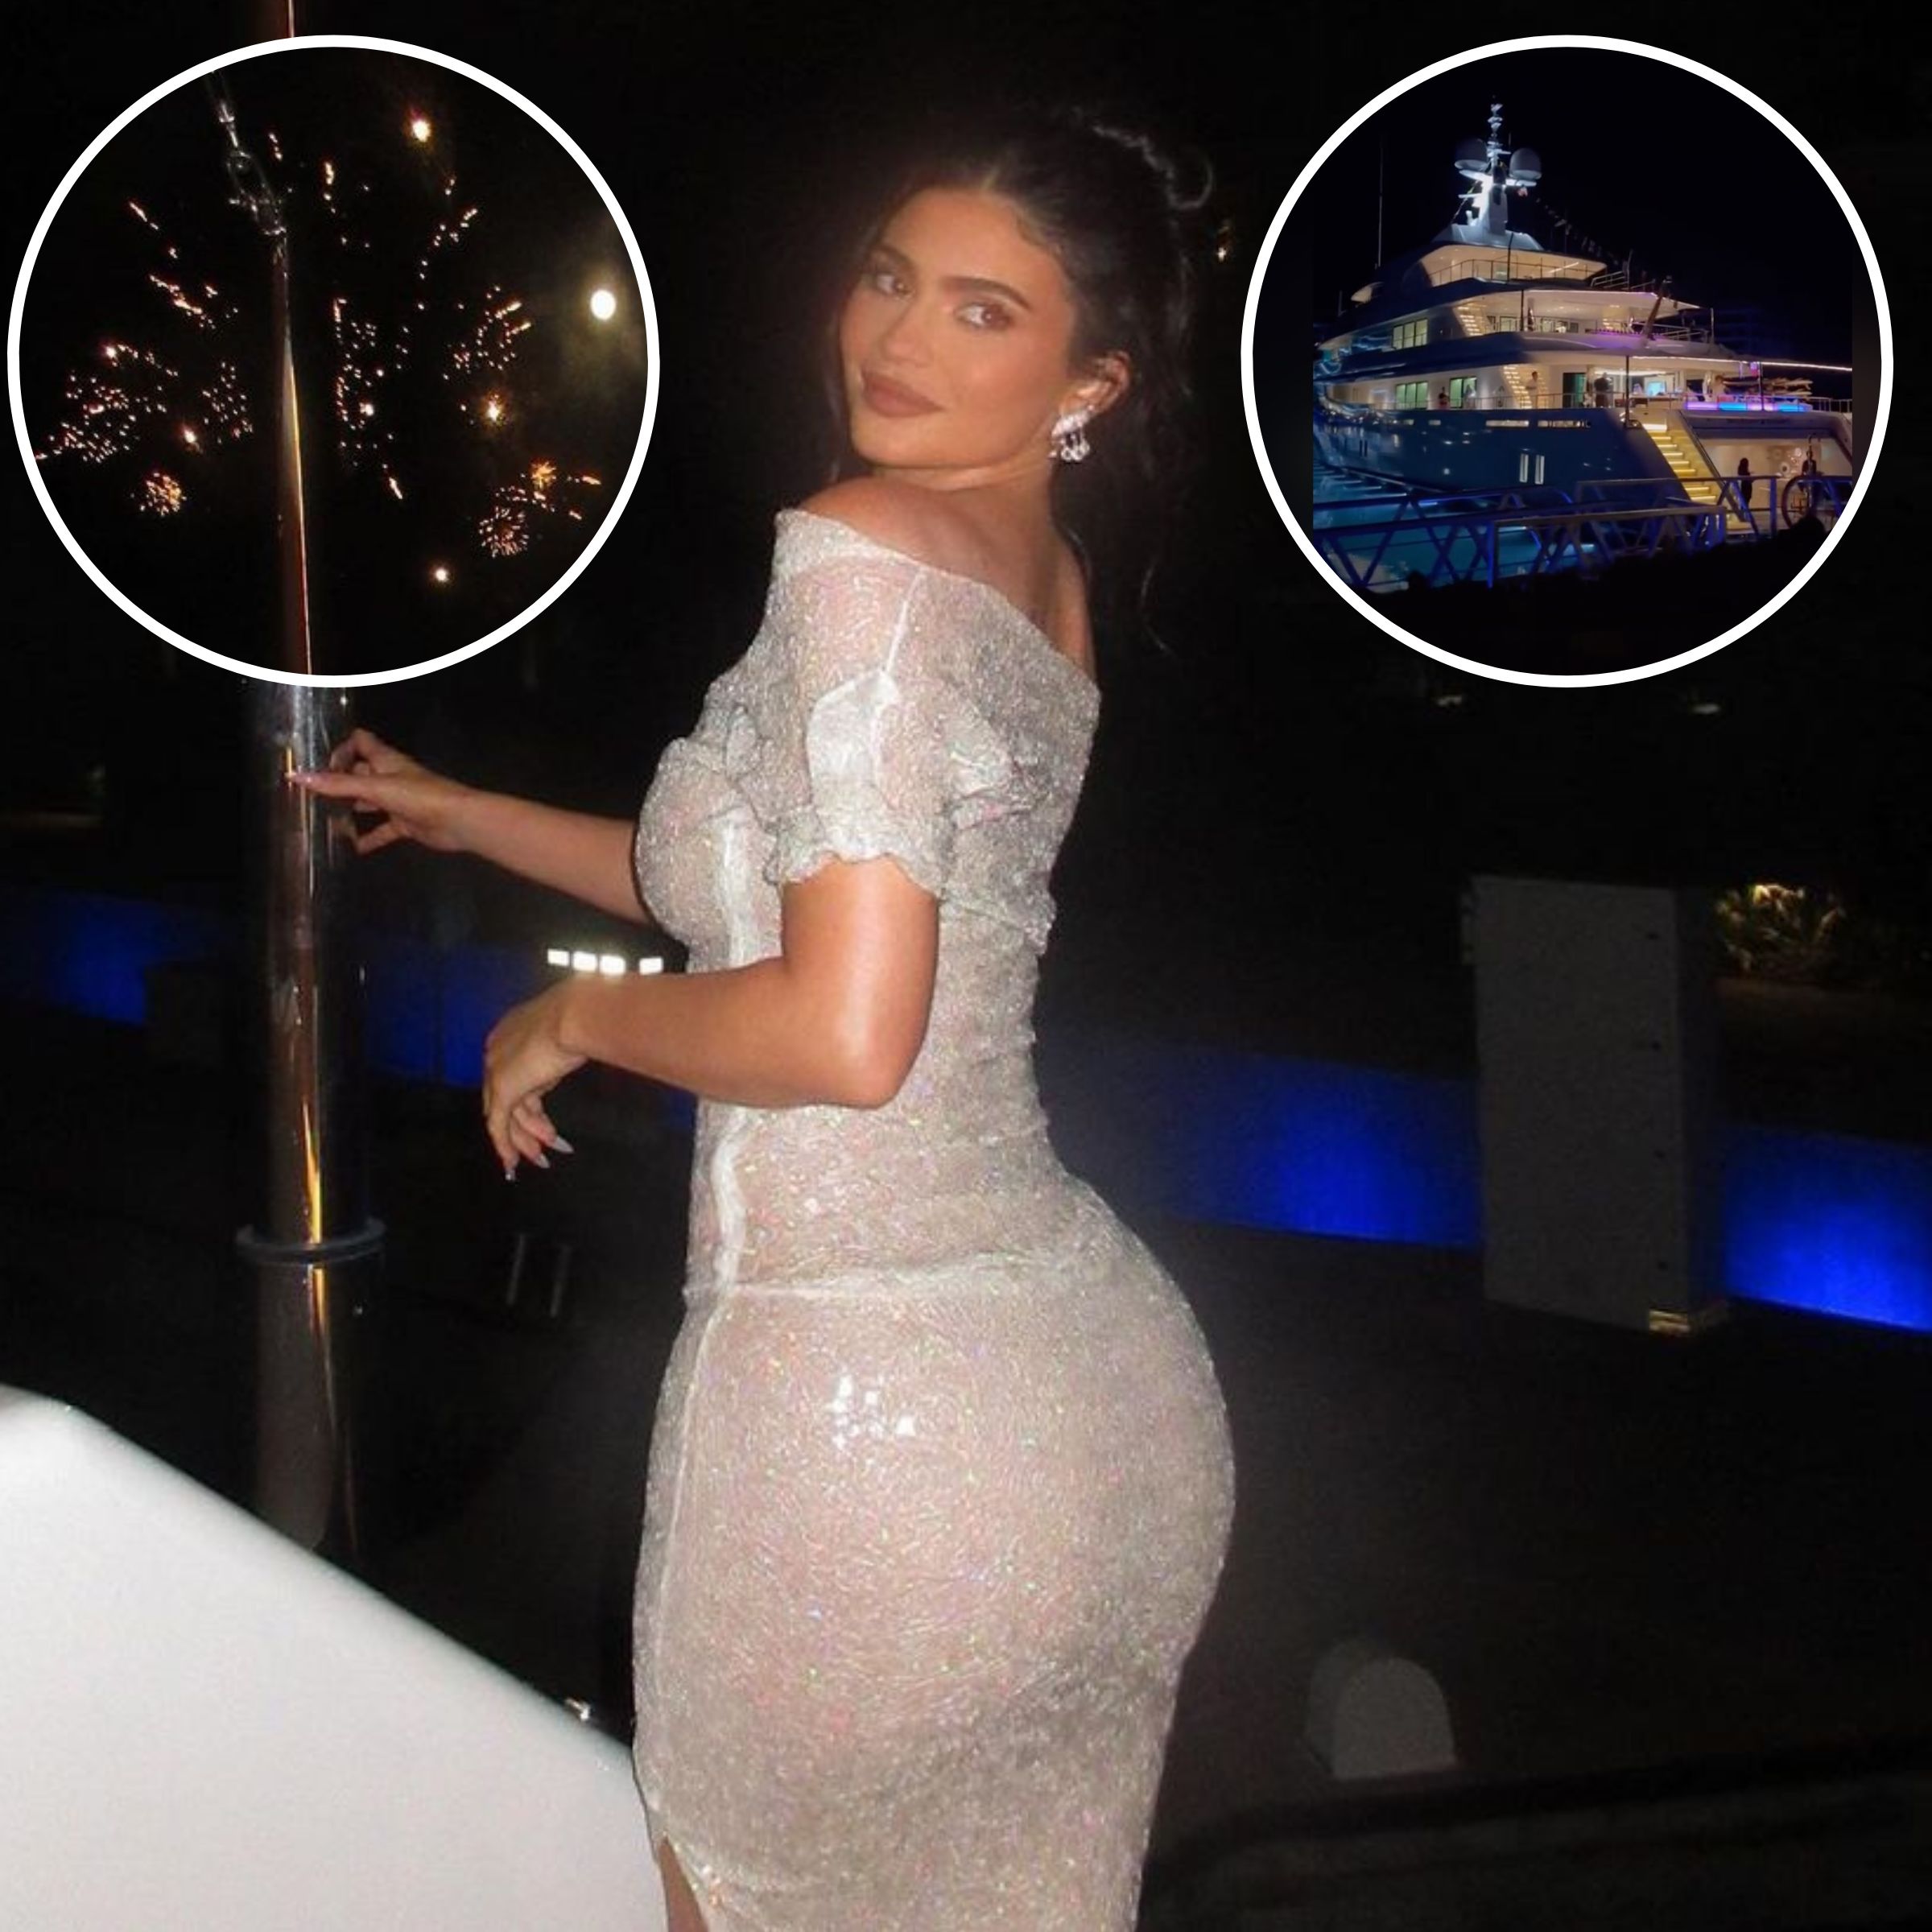 Kylie Jenner parades famous curves in racy see-through dress at lavish ...